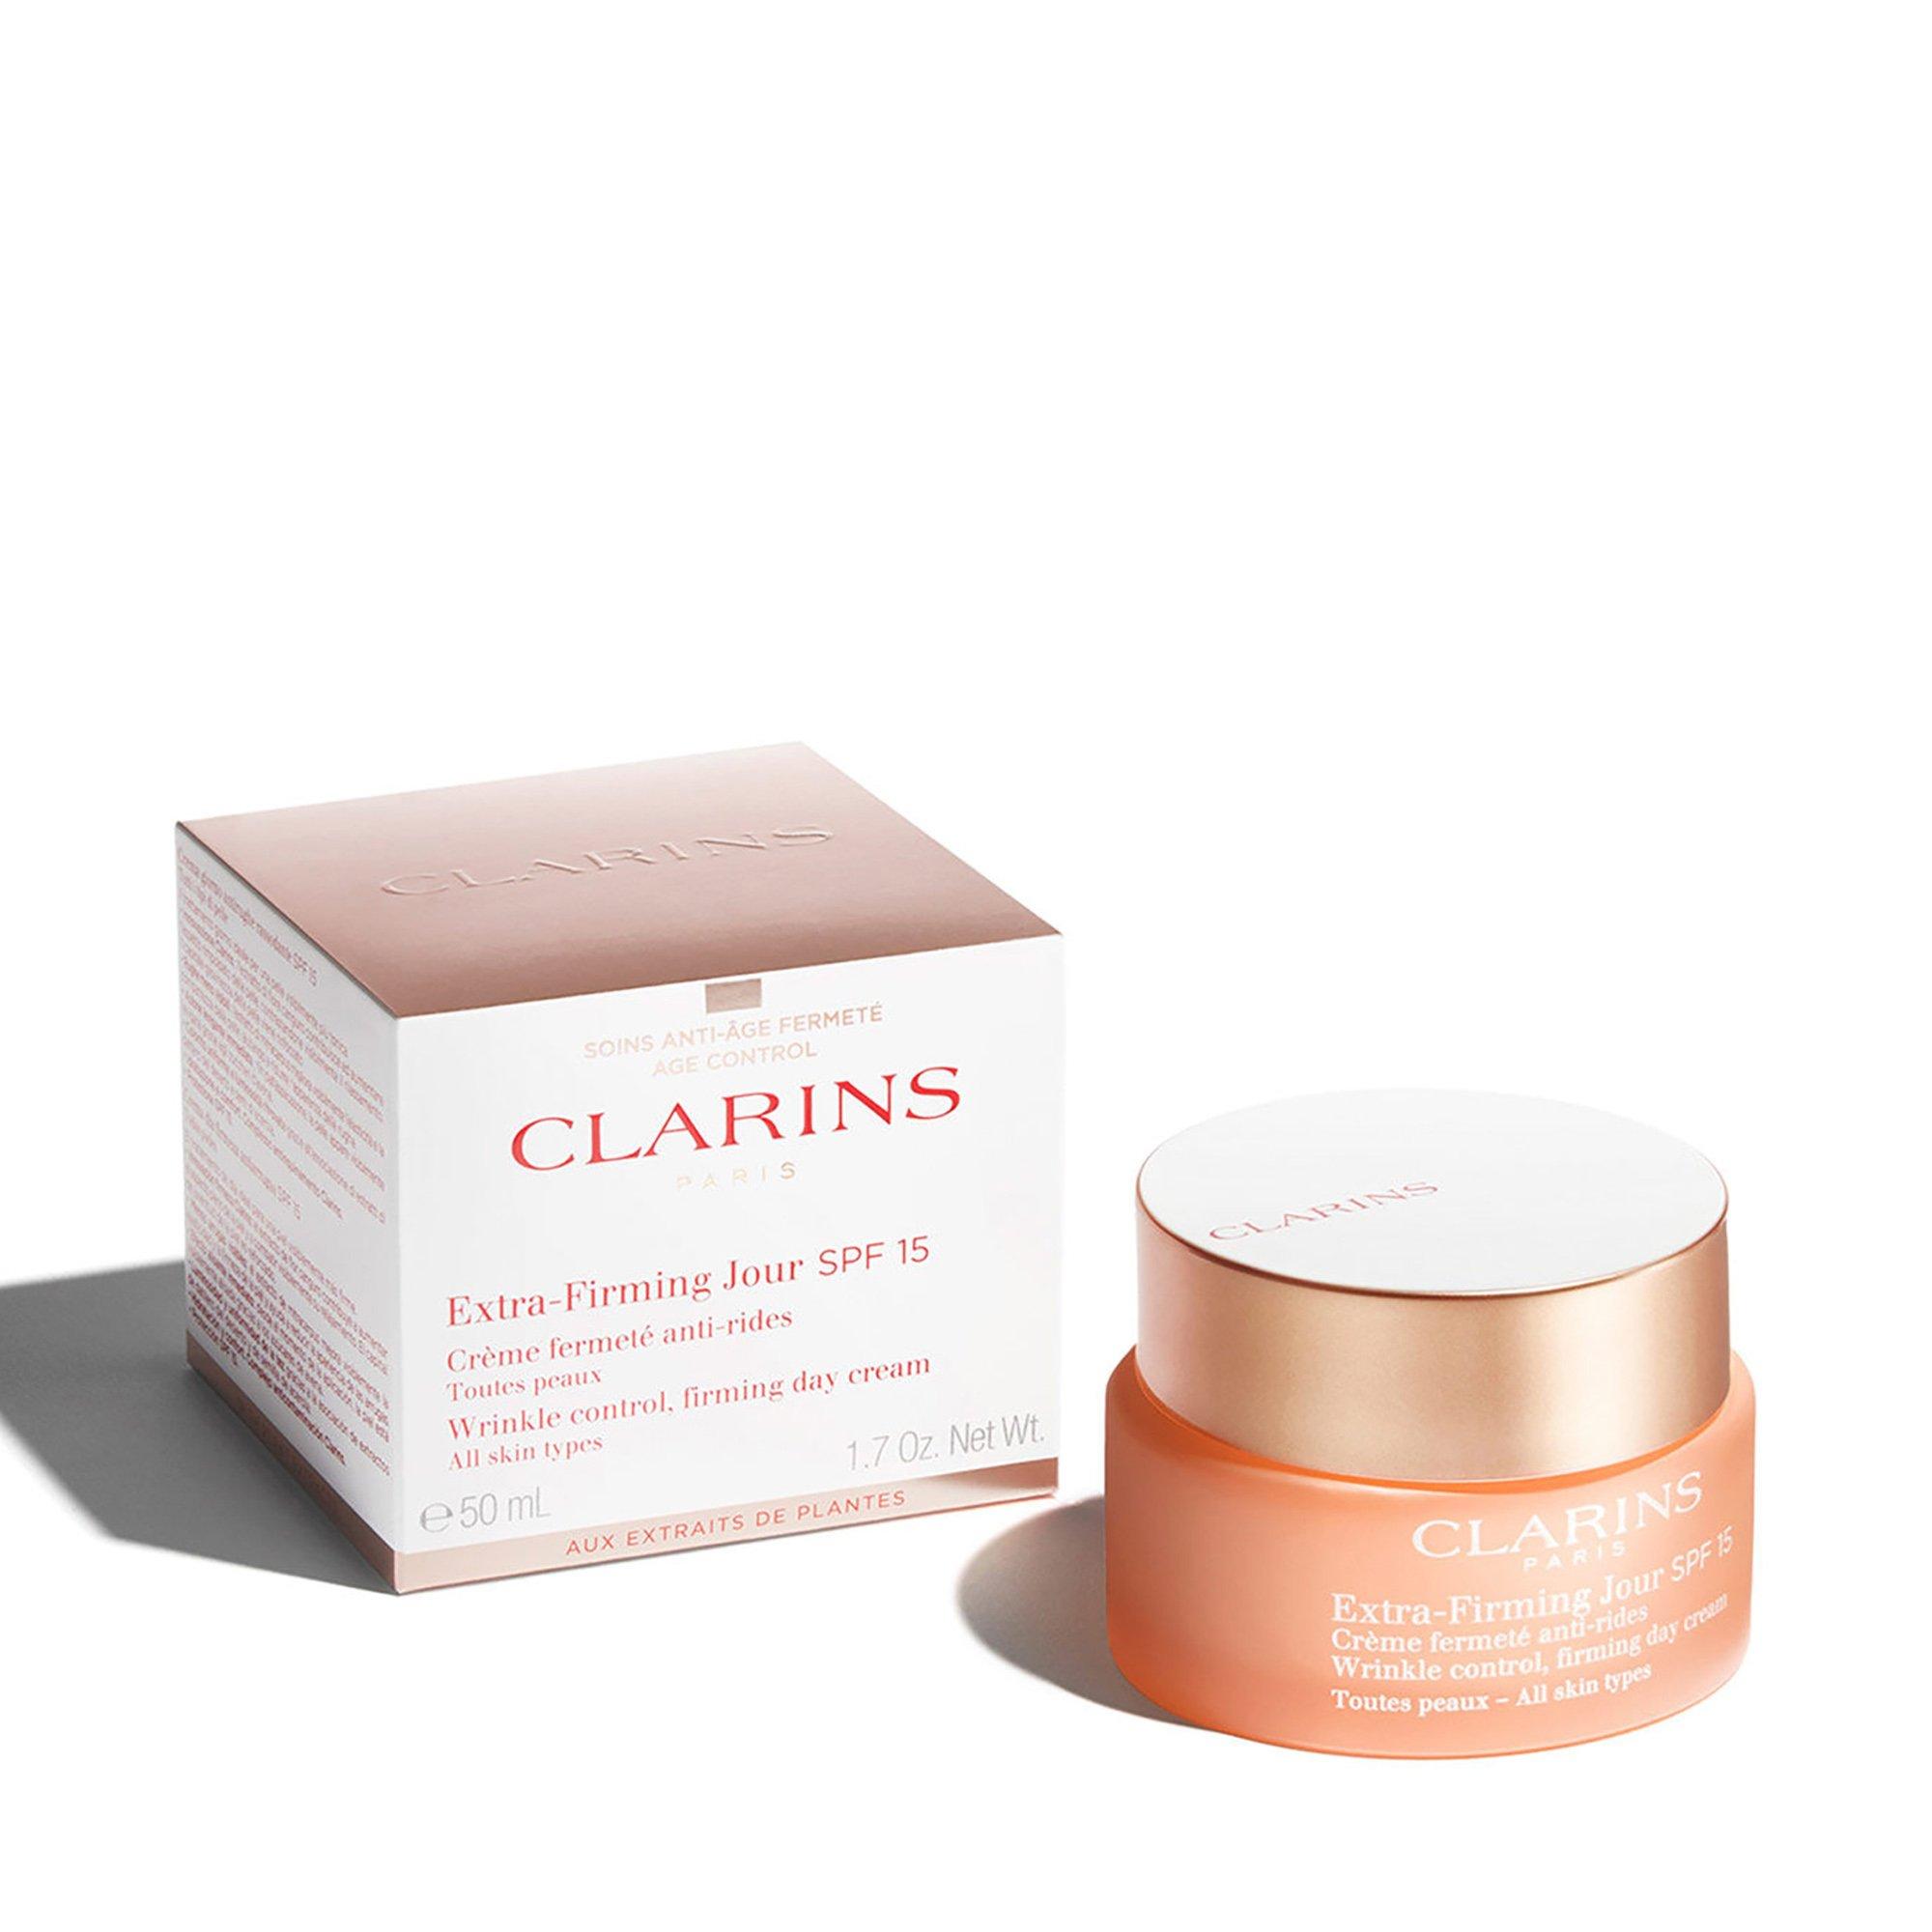 Image of CLARINS Exta-Firming Jour SPF15 - 50ml